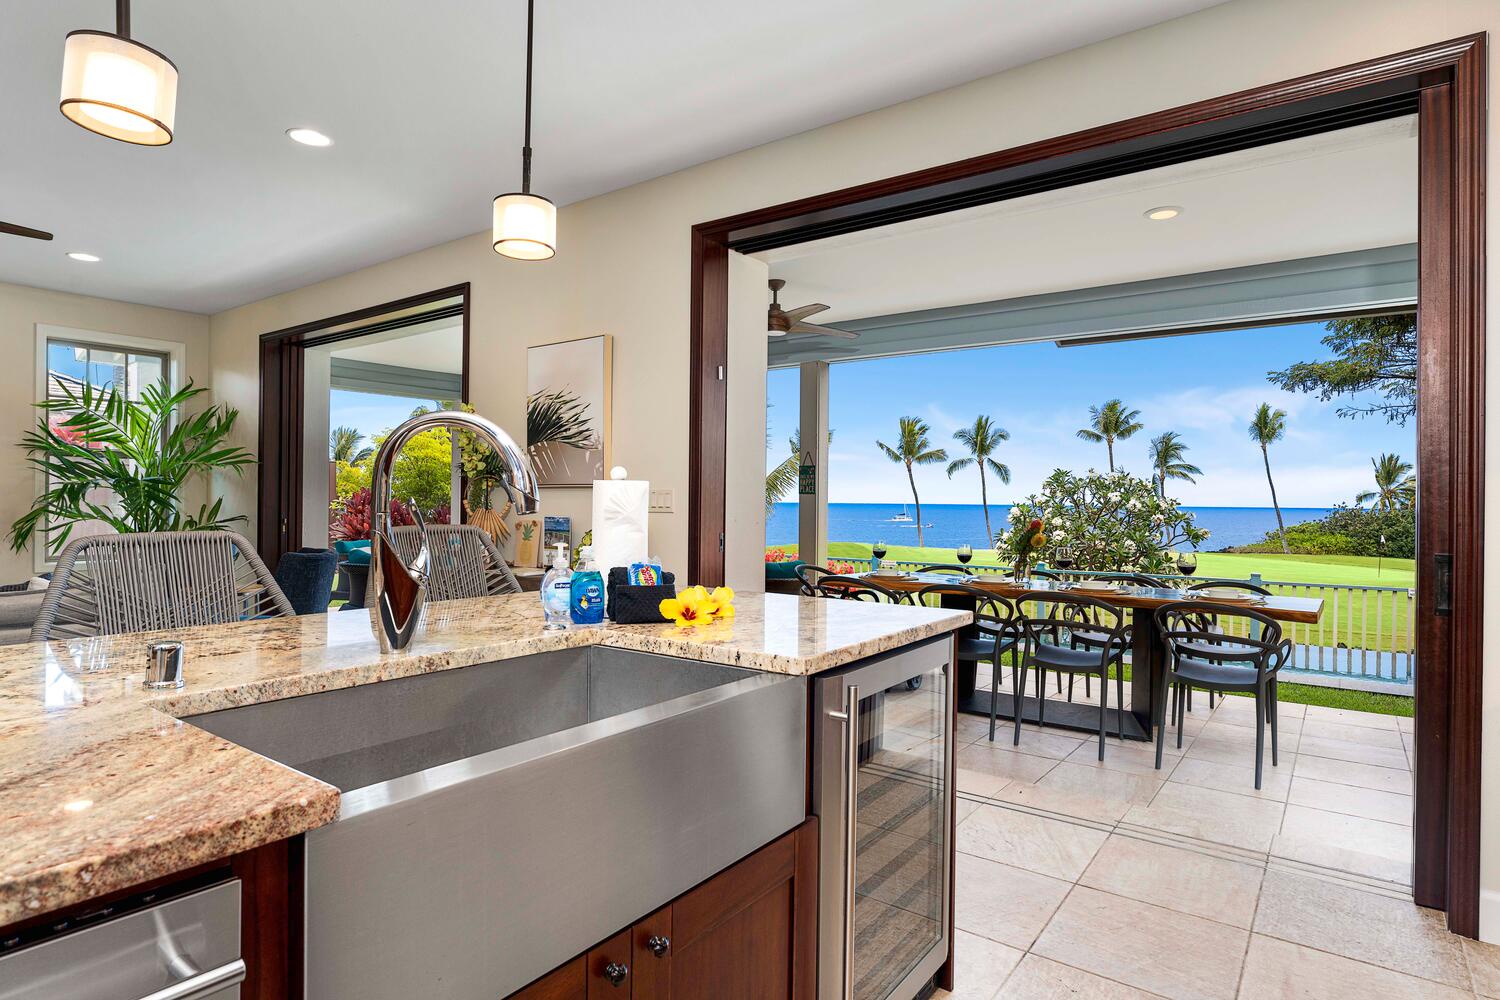 Kailua-Kona Vacation Rentals, Holua Kai #26 - Kitchen with a seamless transition to an oceanfront patio, perfect for entertaining.